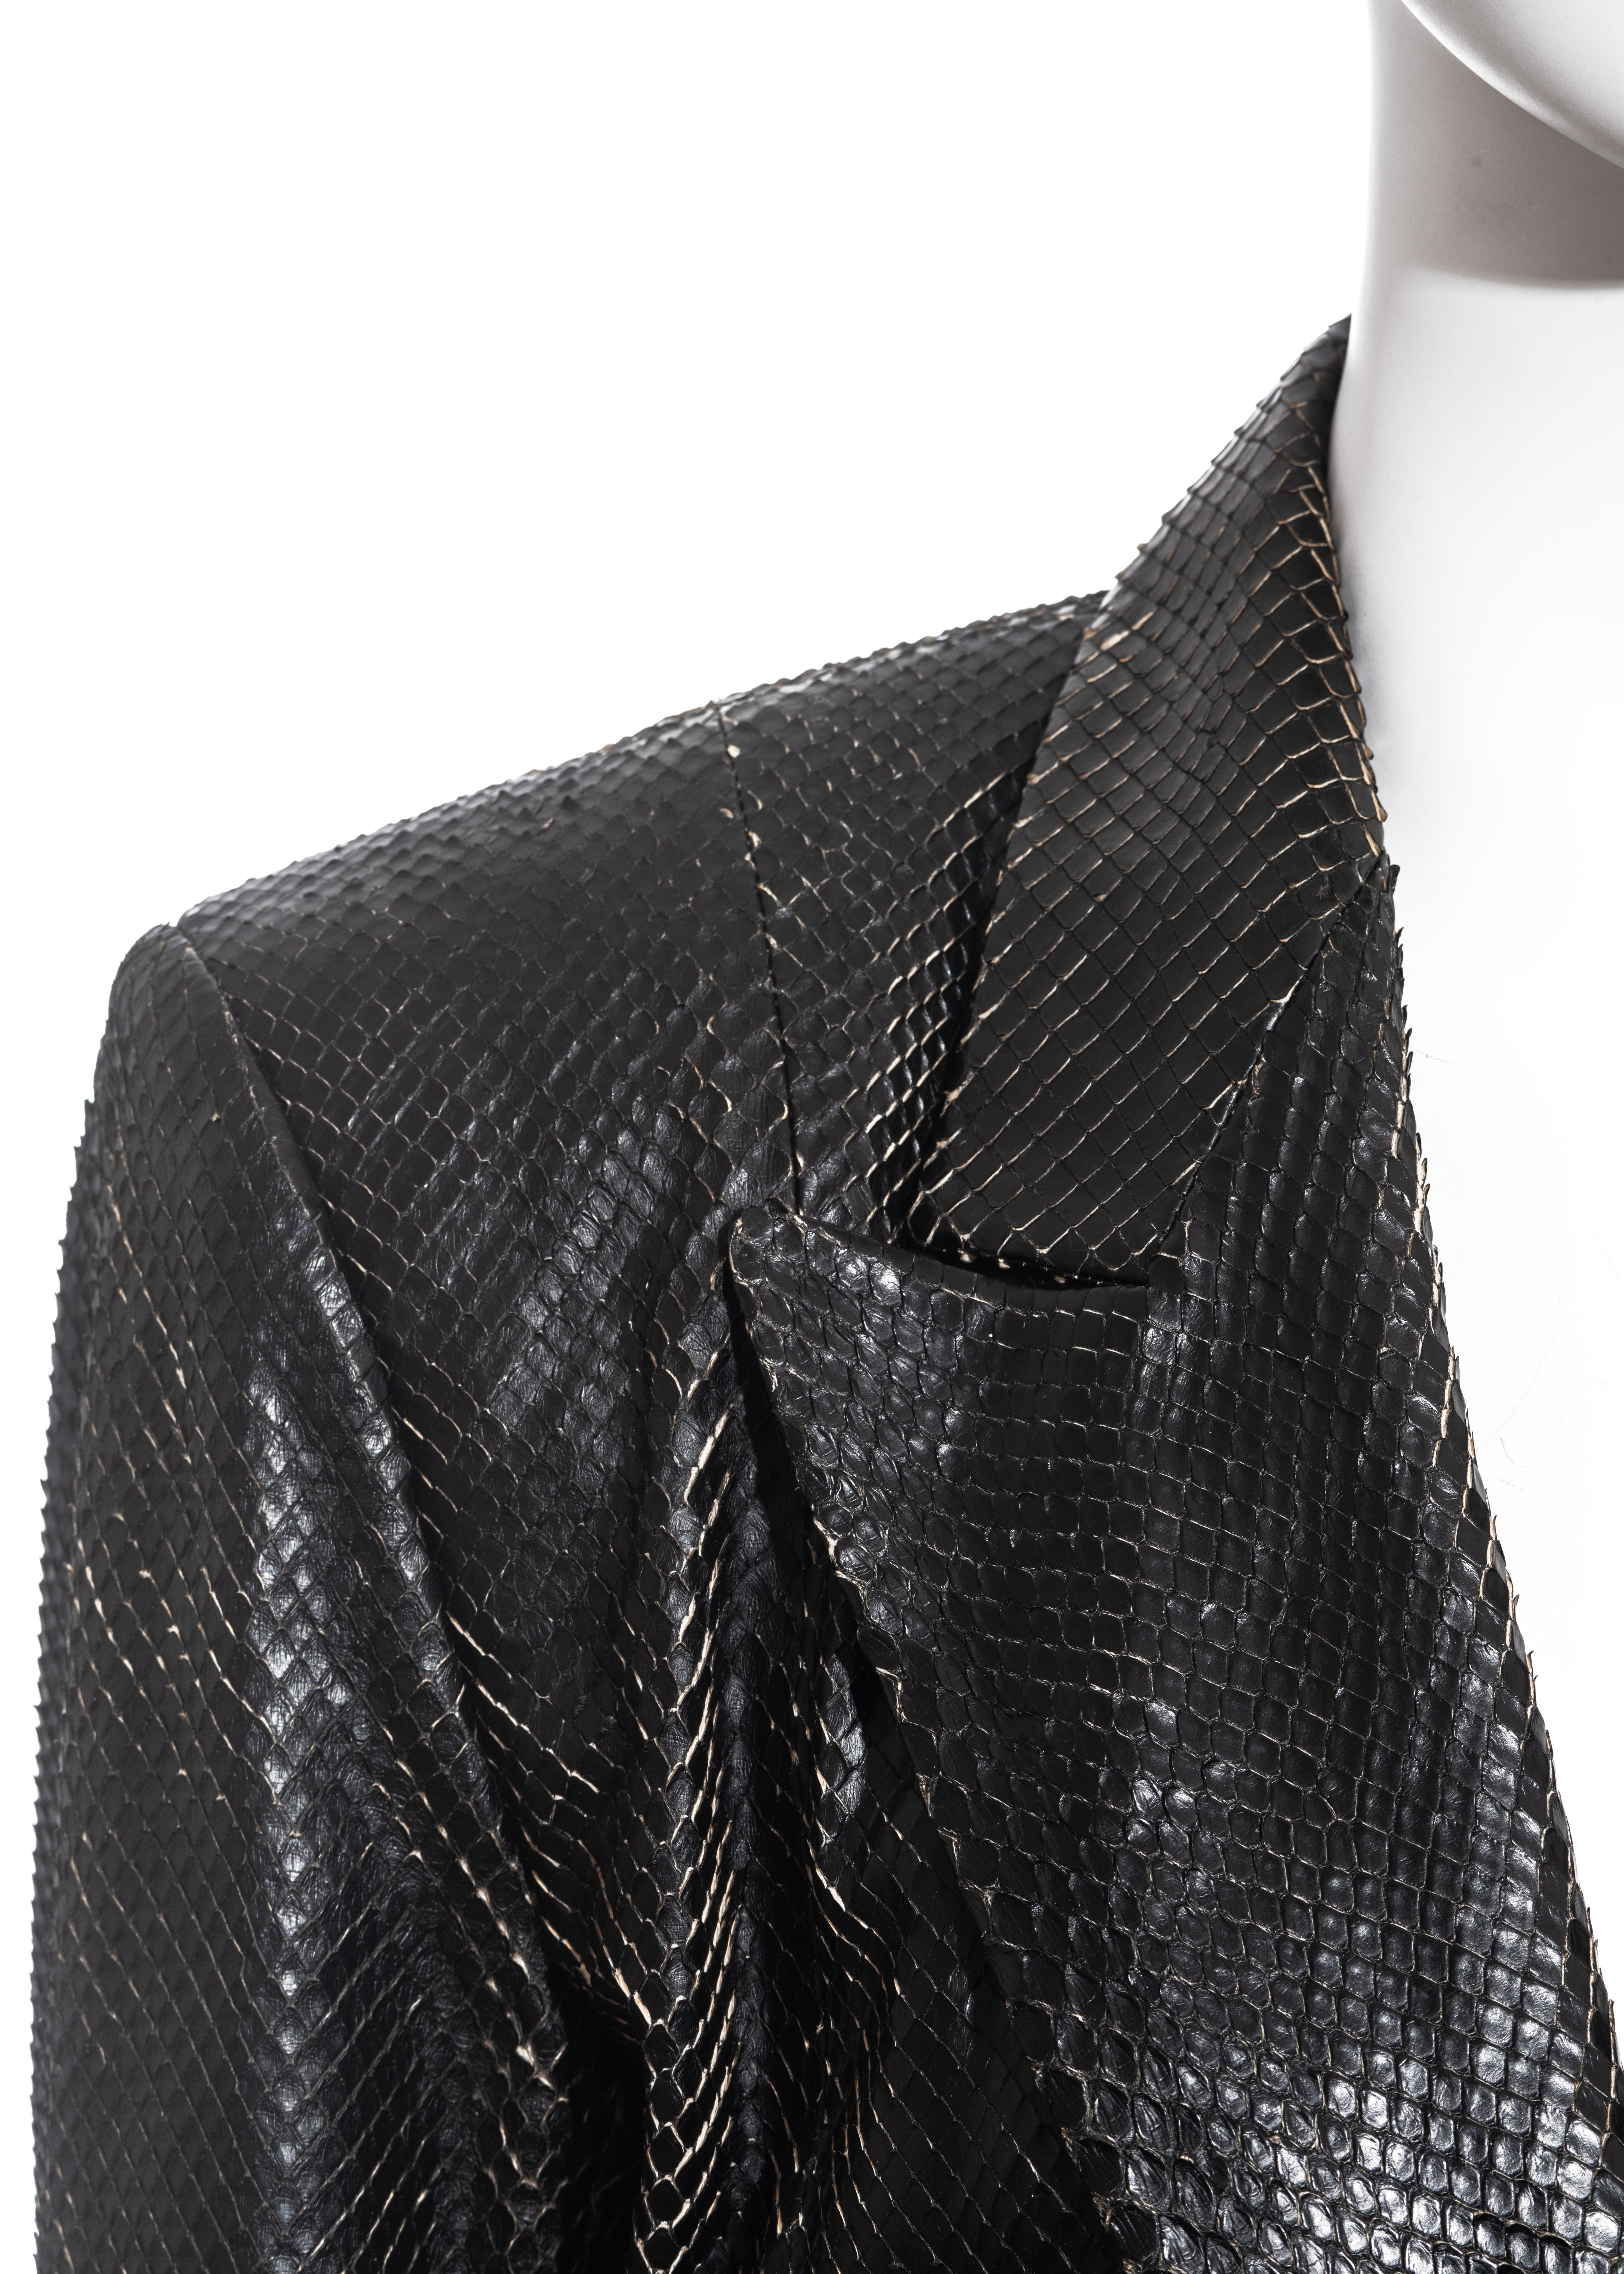 Yves Saint Laurent by Tom Ford black python blazer and skirt suit, ss 2001 1